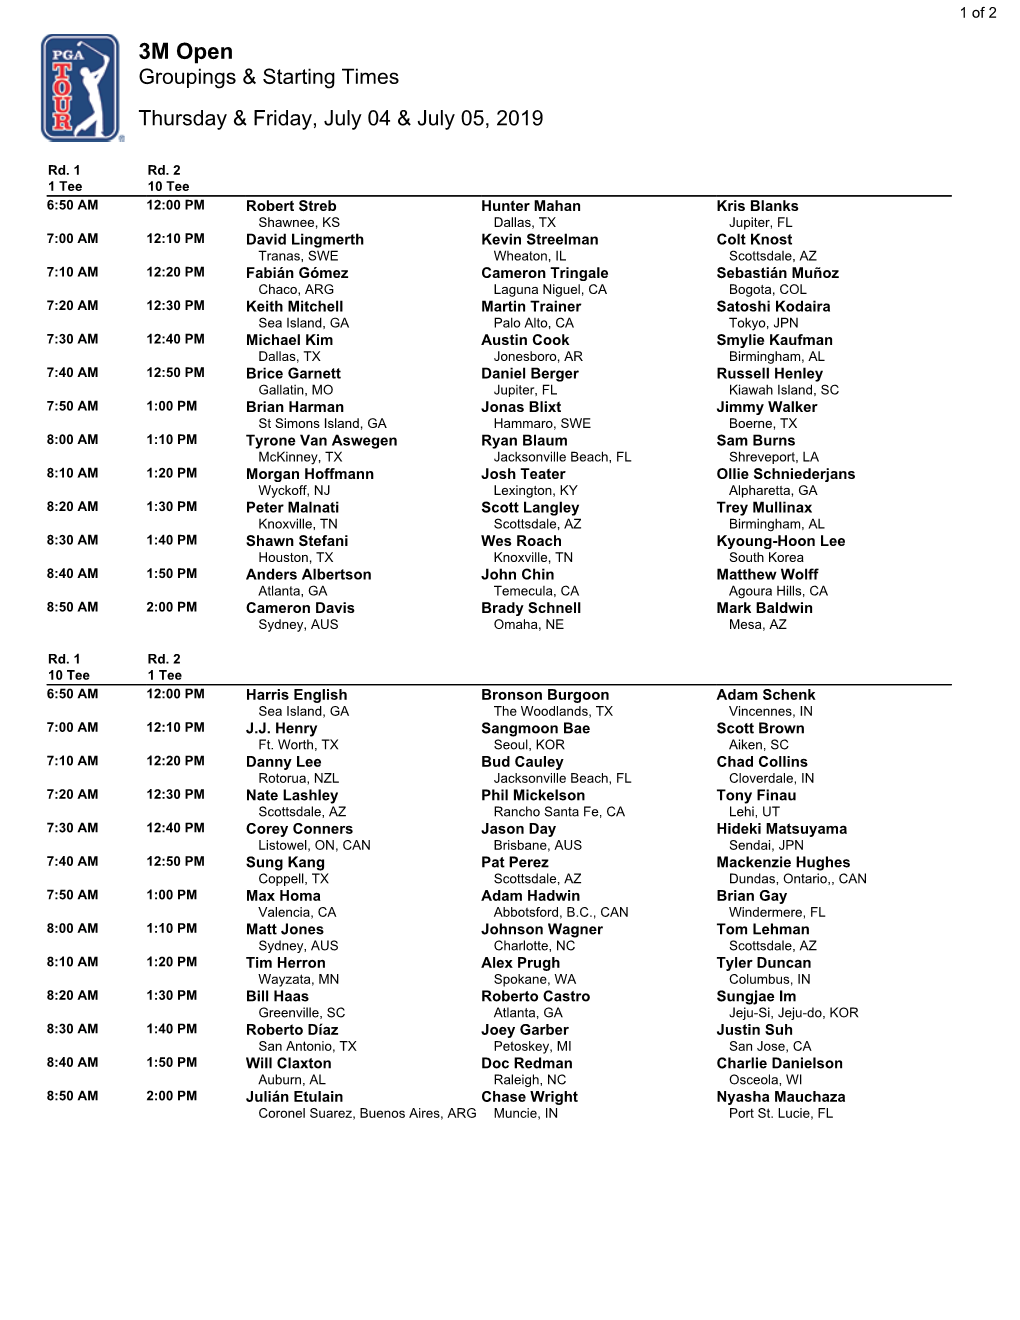 3M Open Groupings & Starting Times Thursday & Friday, July 04 & July 05, 2019